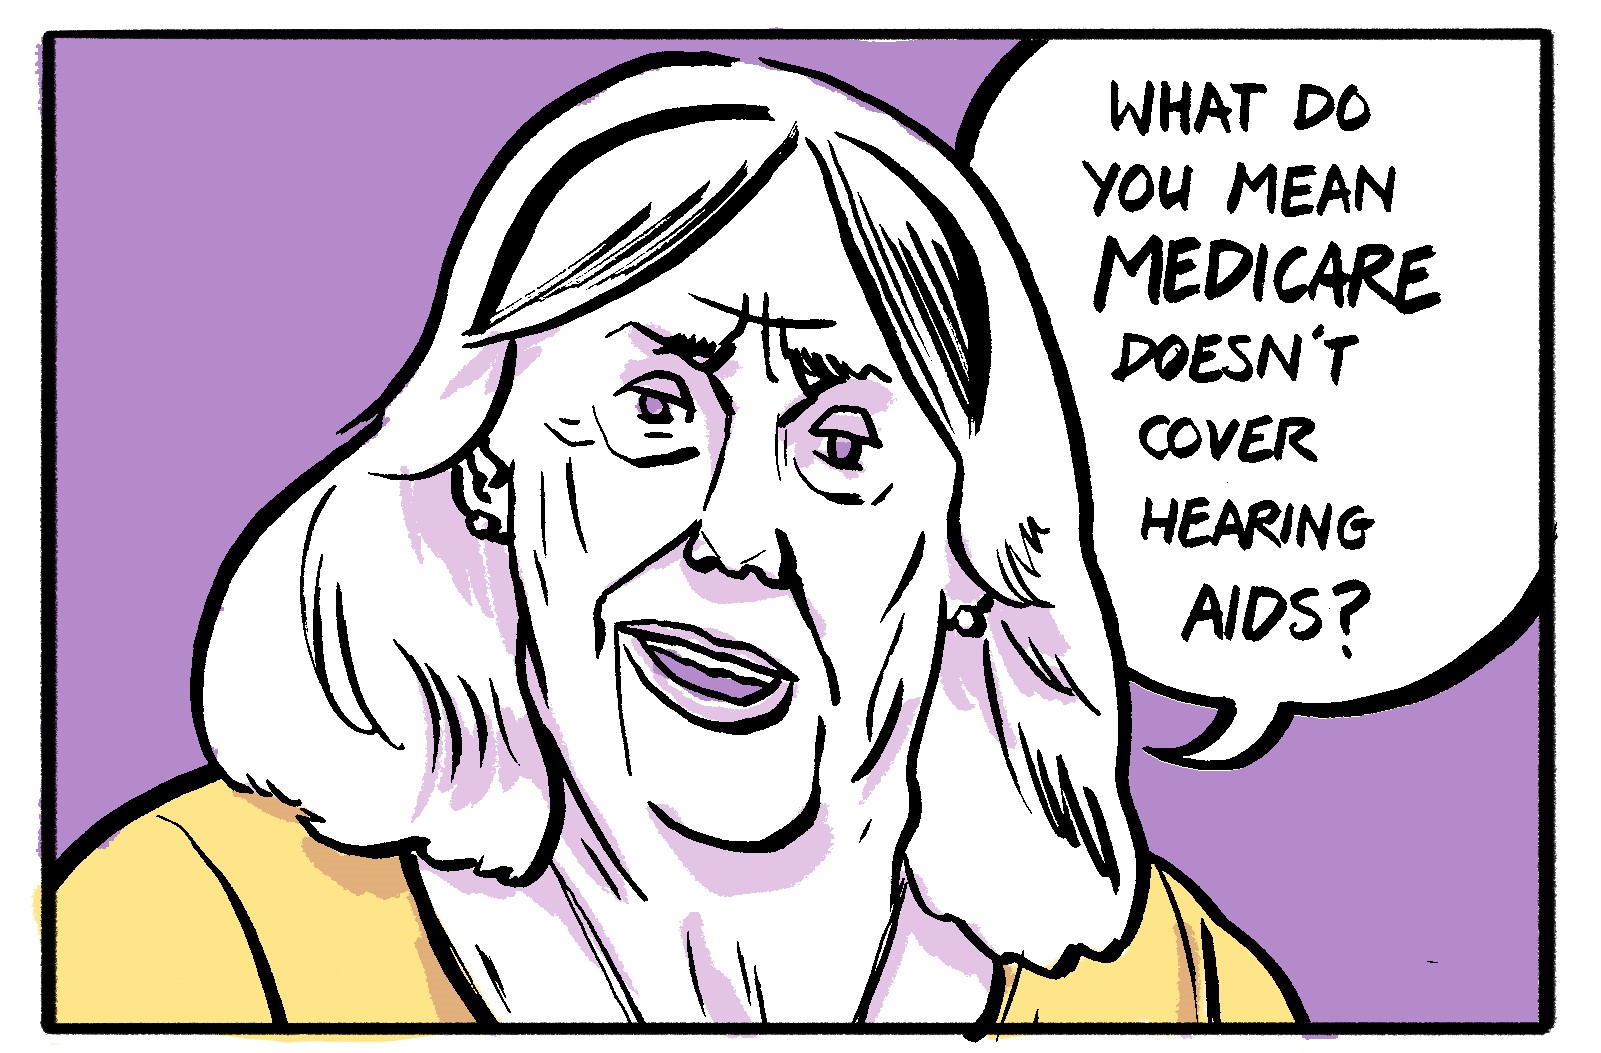 Comic book-style illustration of a woman asking "What Do You Mean Medicare Doesn't Cover Hearing Aids?" 